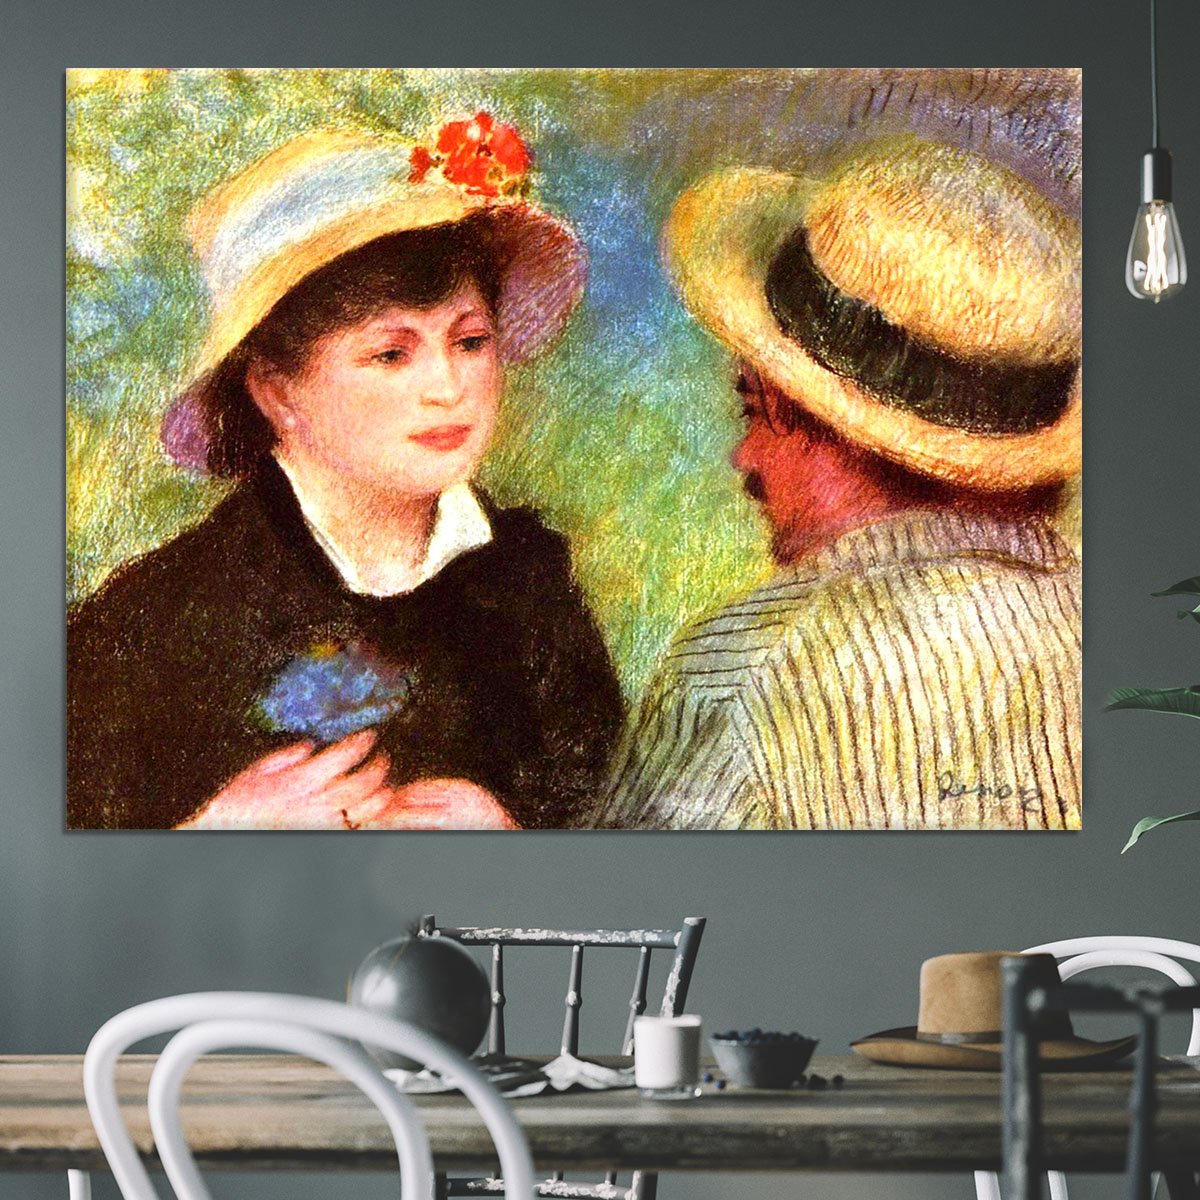 Les Canotiers by Renoir Canvas Print or Poster